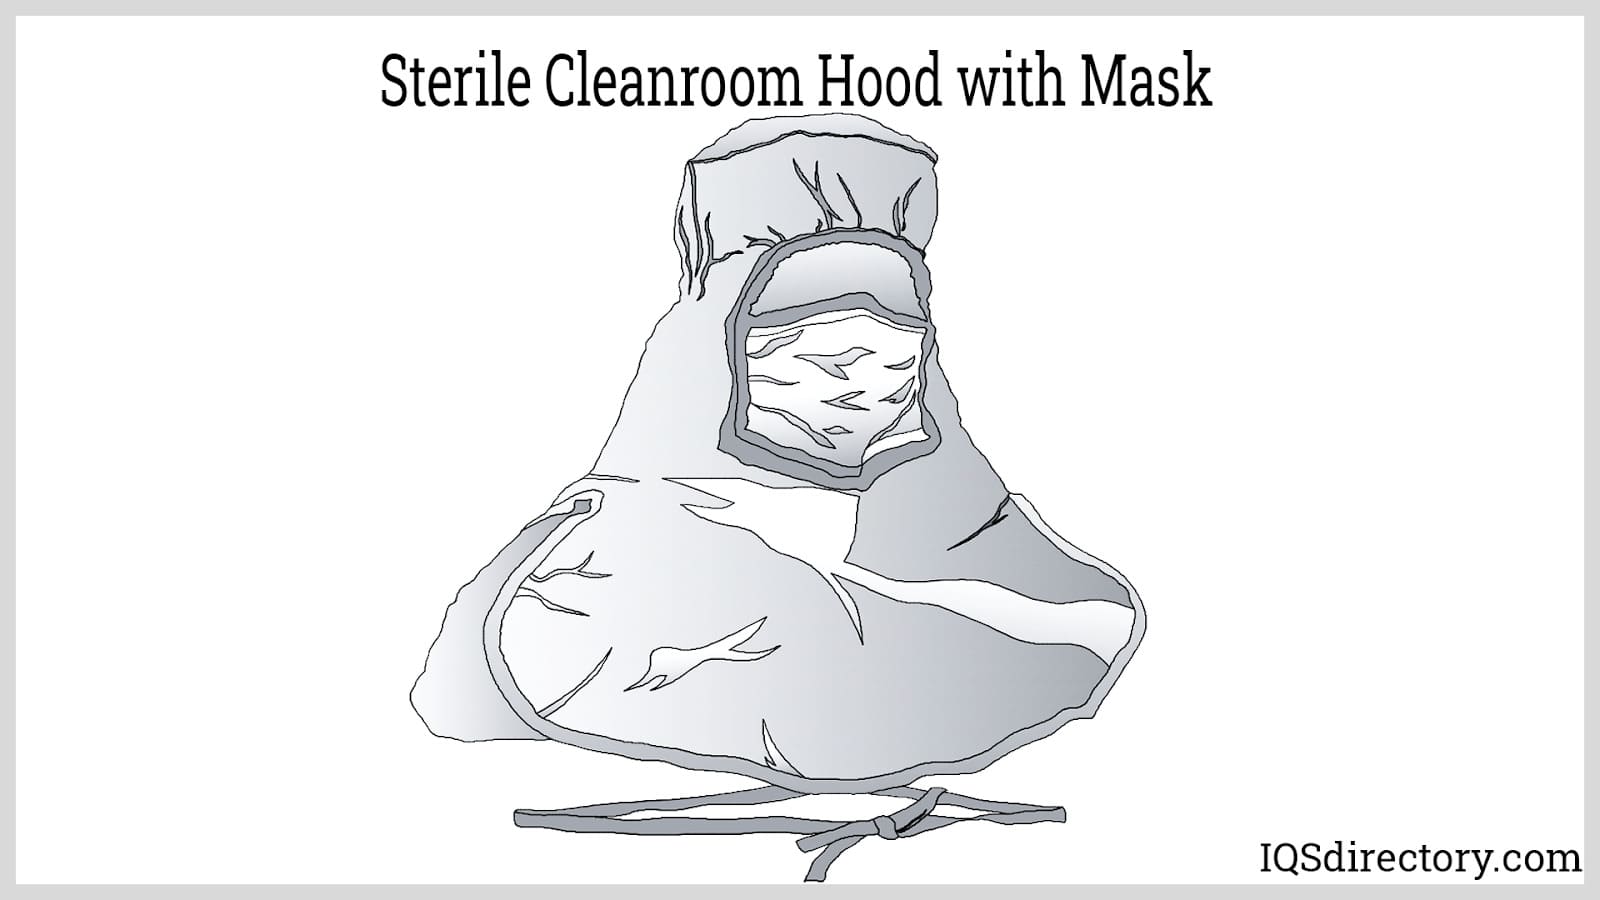 Sterile Cleanroom Hood with Mask